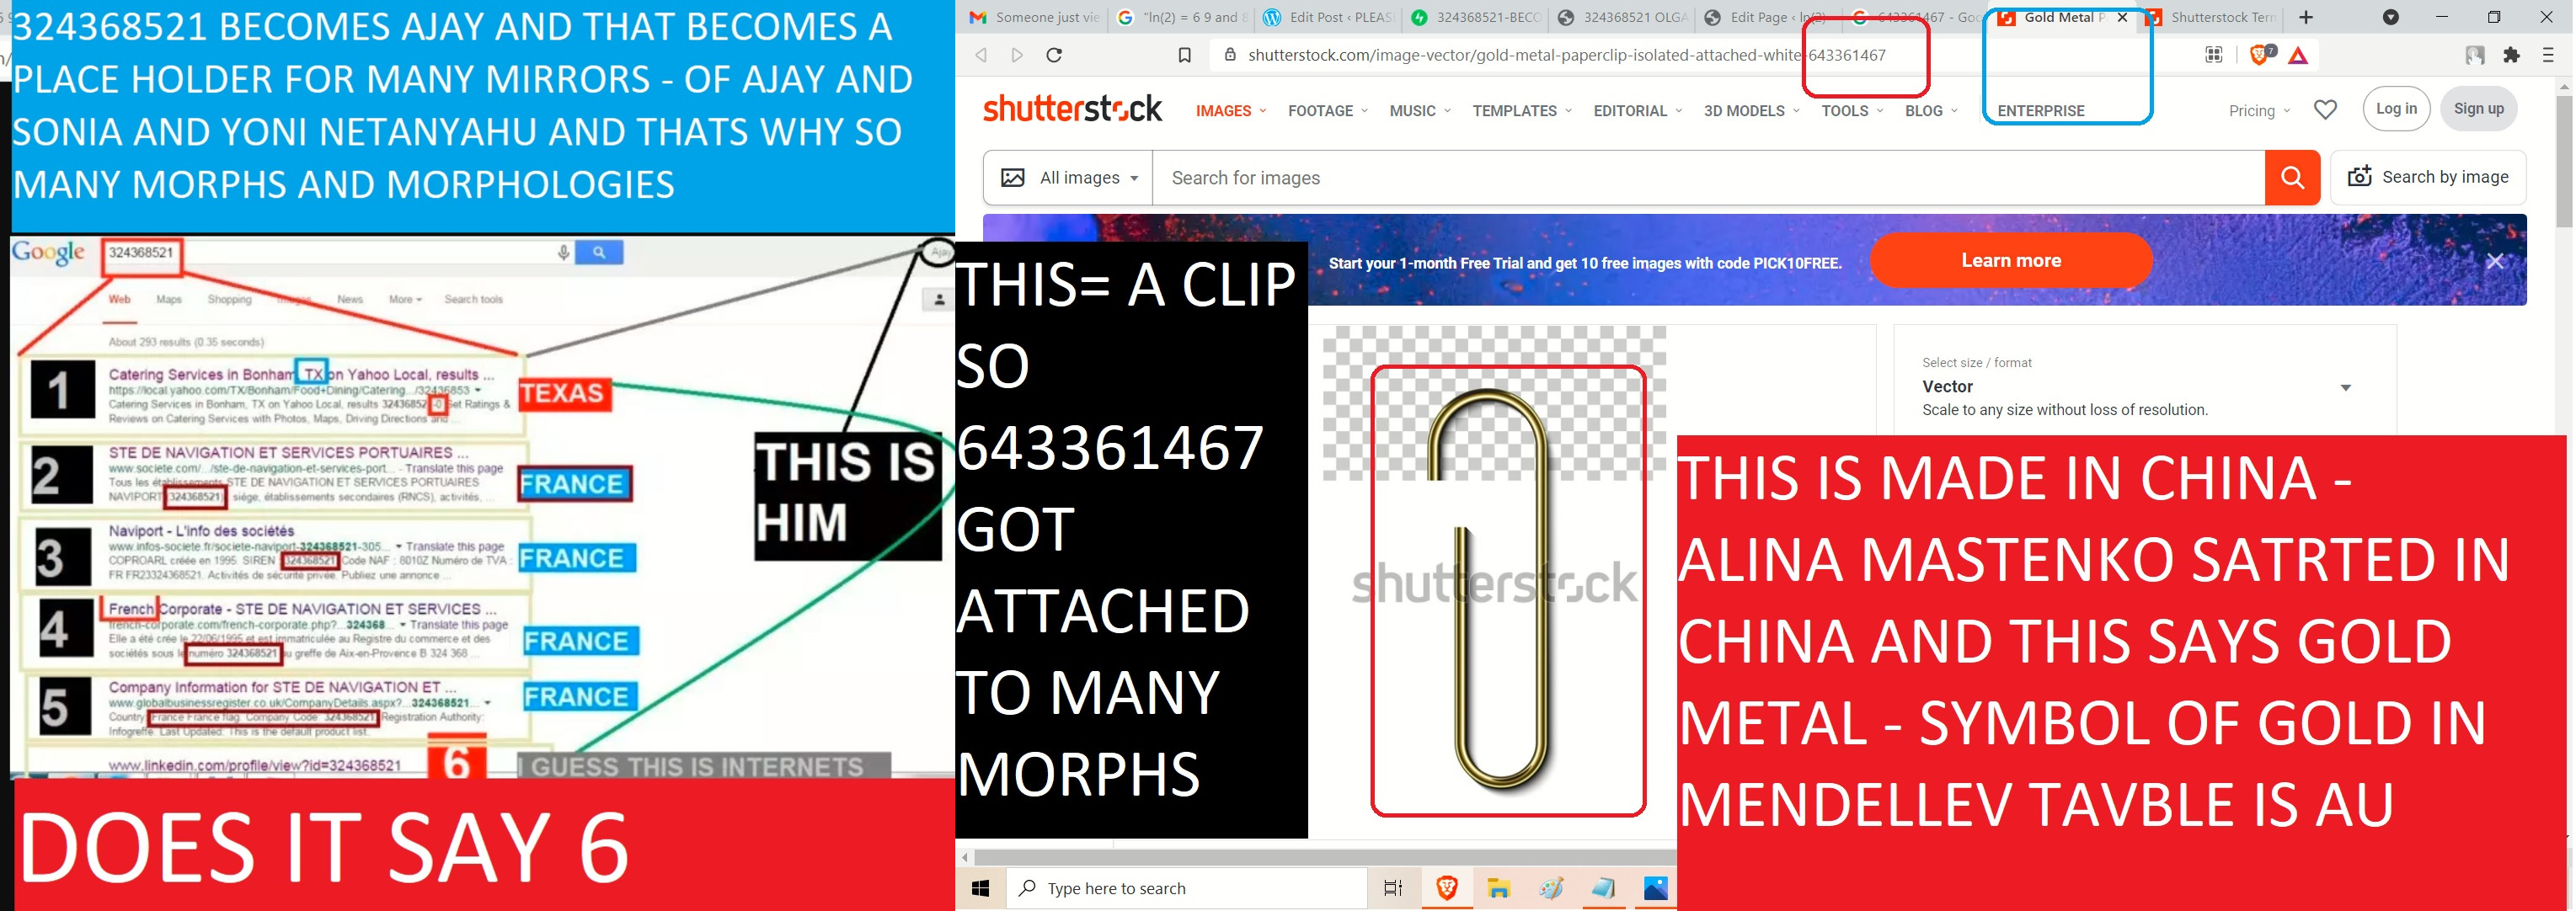 643361467 A CLIP MADE IN CHIN A- SO, THIS IS A GOLD CLIP - GLD = AU IN EMNDELEEV TABLE - THIS IS A CLIP THIS GOT ASTATACHED TO MANY MORPHS AND 324368521 IS ASLO AJAY